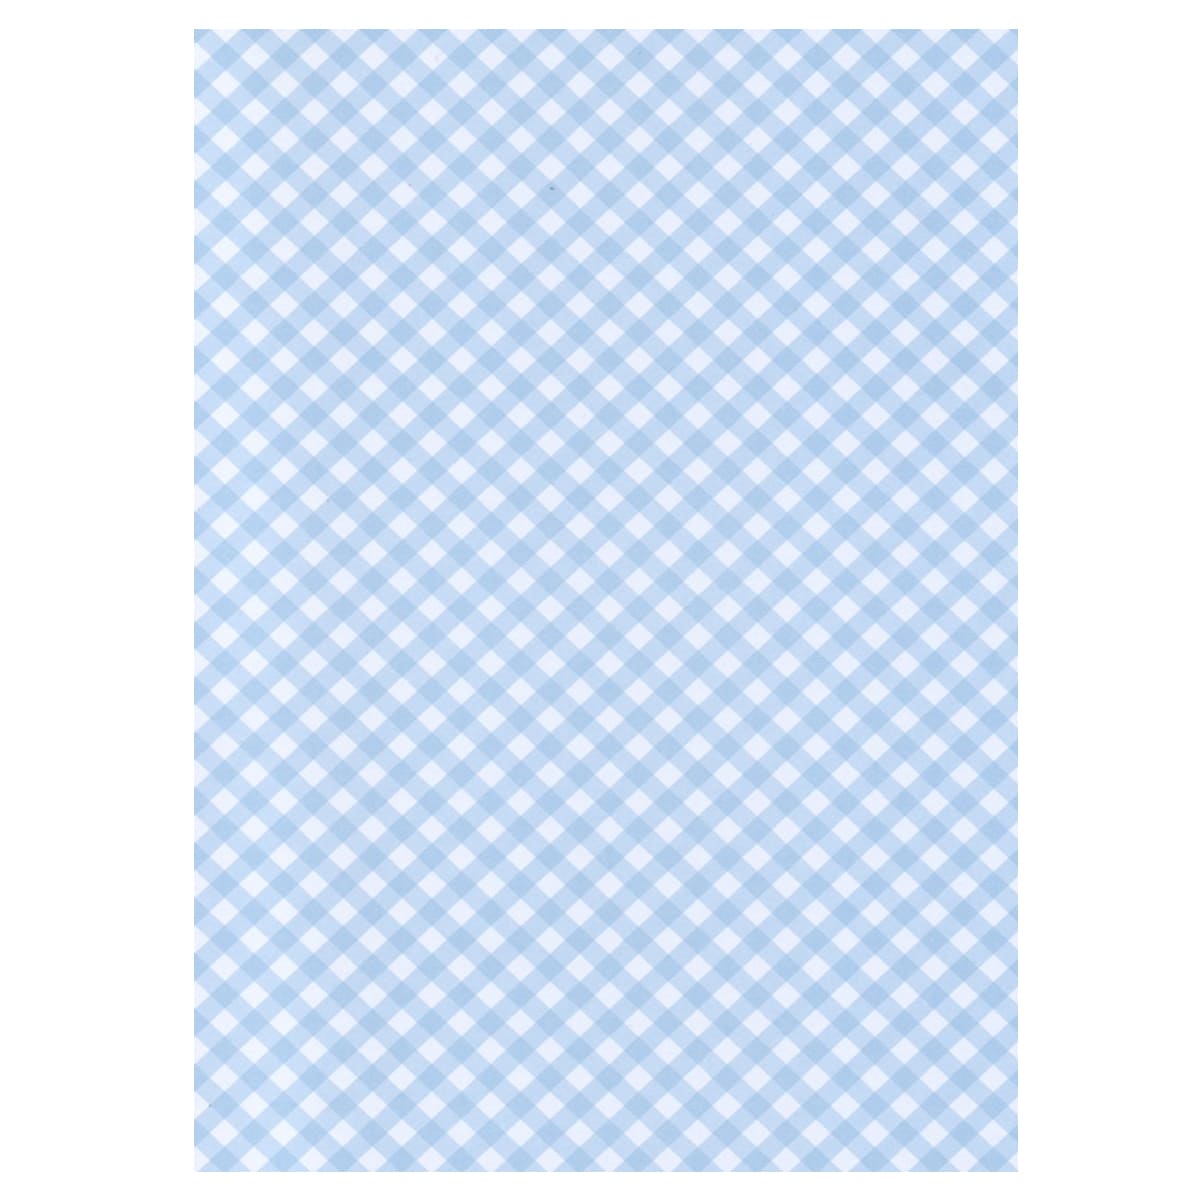 A4 BABY BLUE BRILLIANCY CHECK GINGHAM CARD 300 GSM